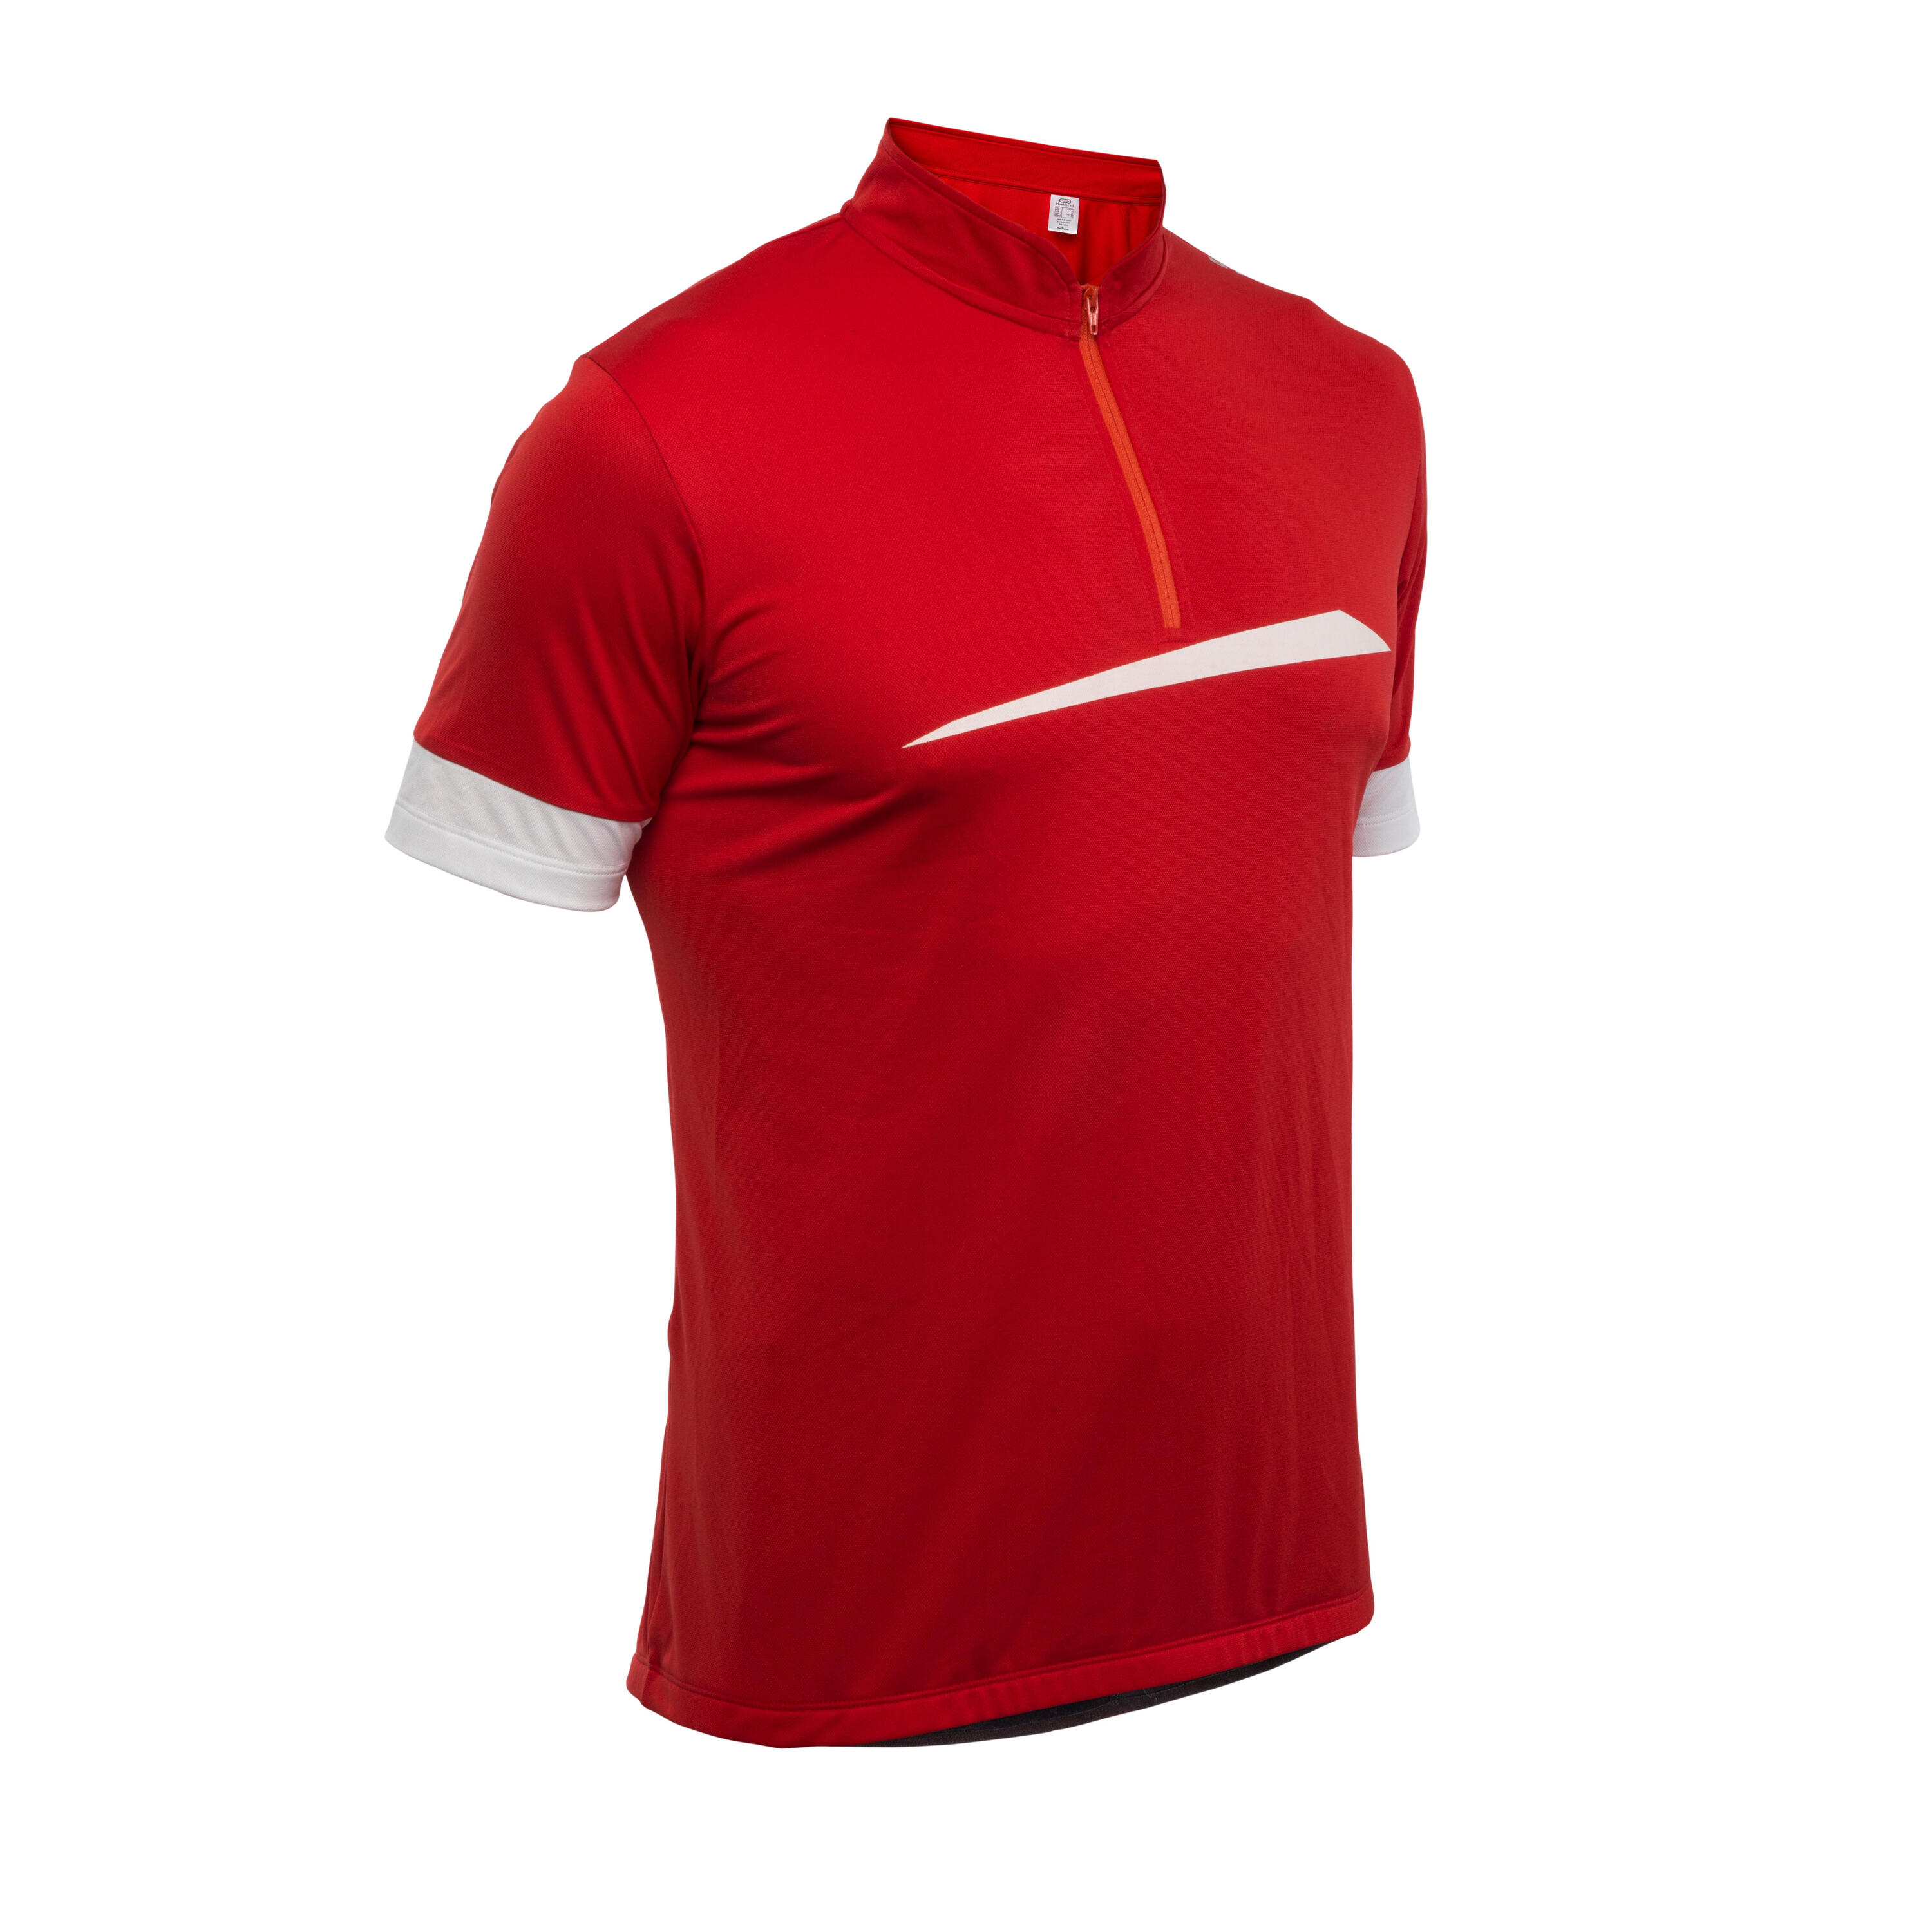 BTWIN 320 Short-Sleeved Cycling Jersey - Red/White